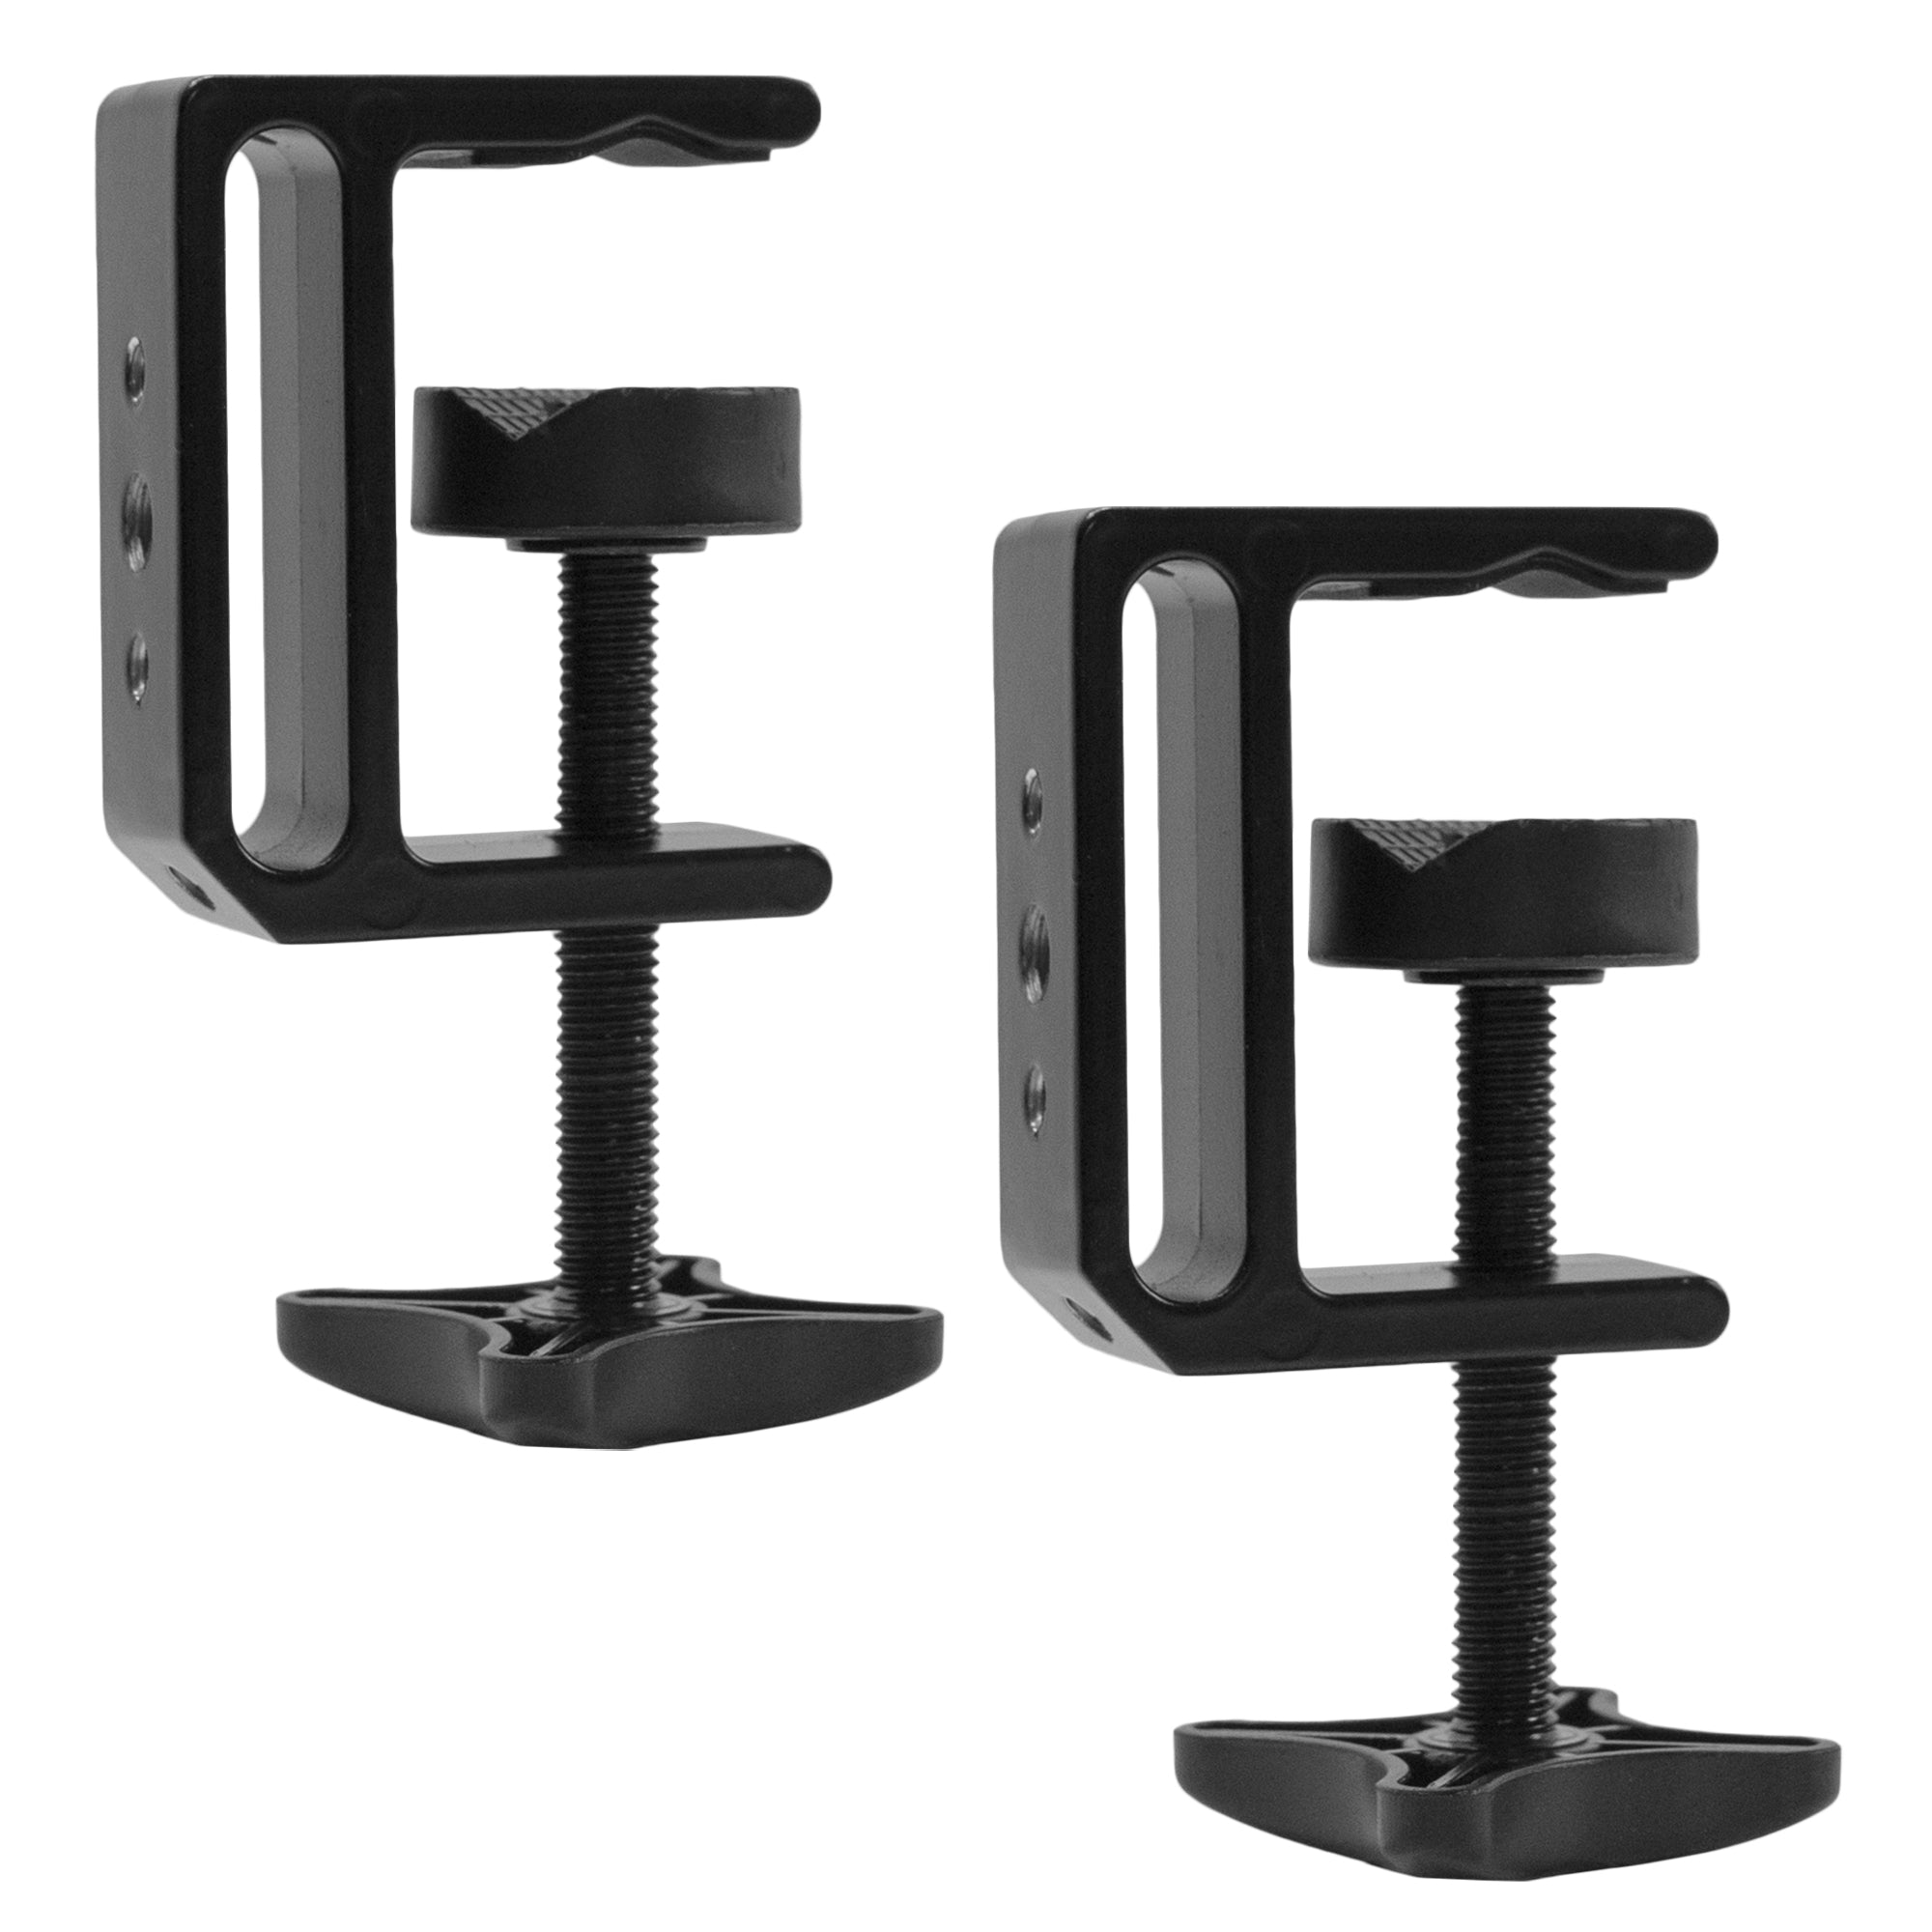 Clamp-on Desk Cup Holder – VIVO - desk solutions, screen mounting, and more